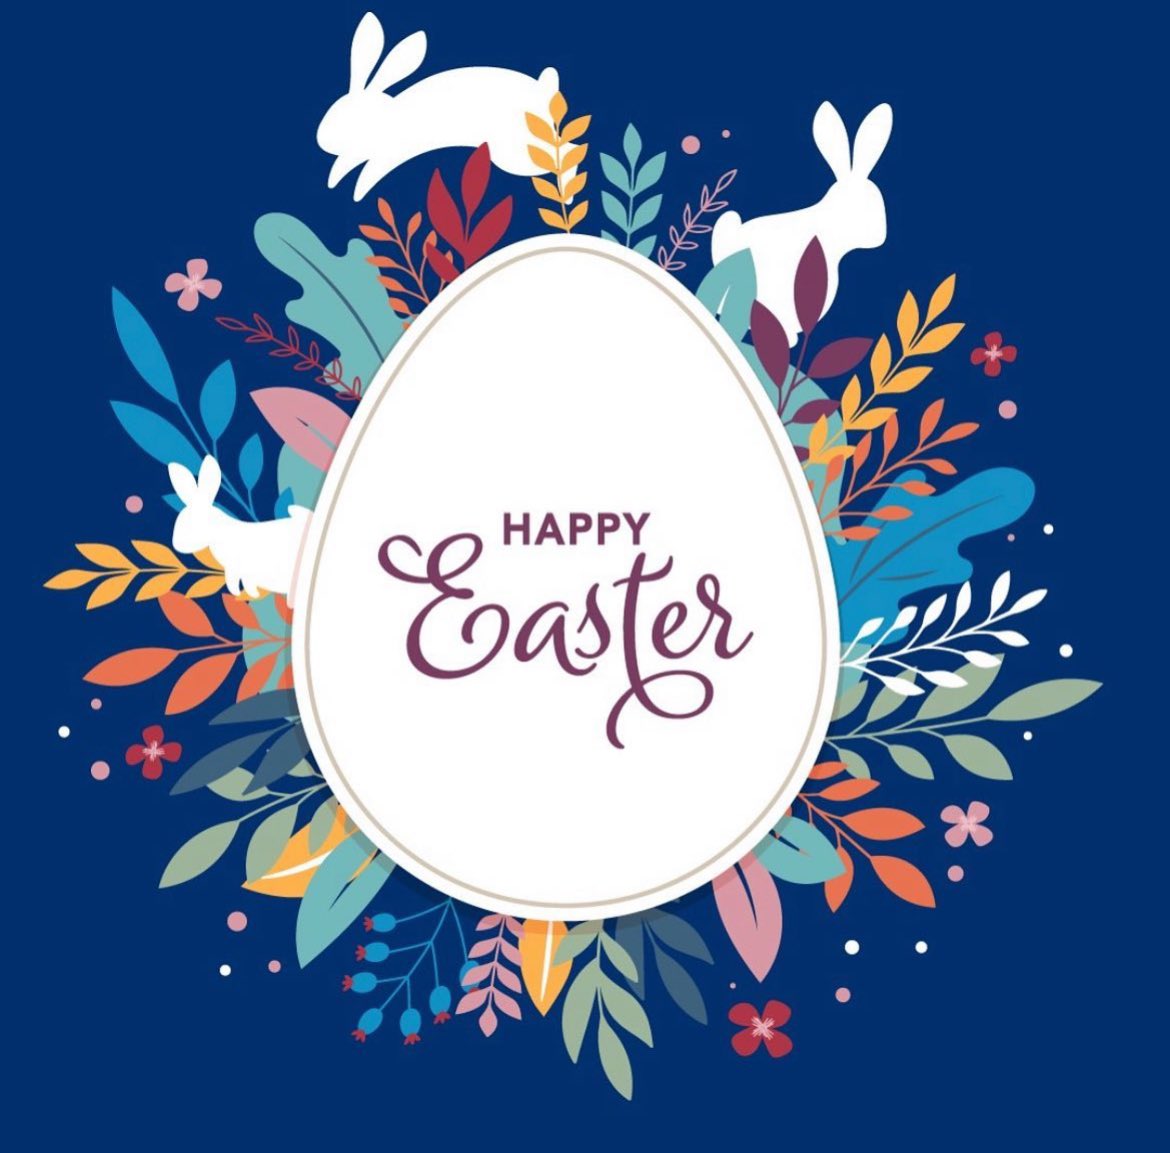 Queensborough sends our warmest wishes to all who are celebrating Easter!